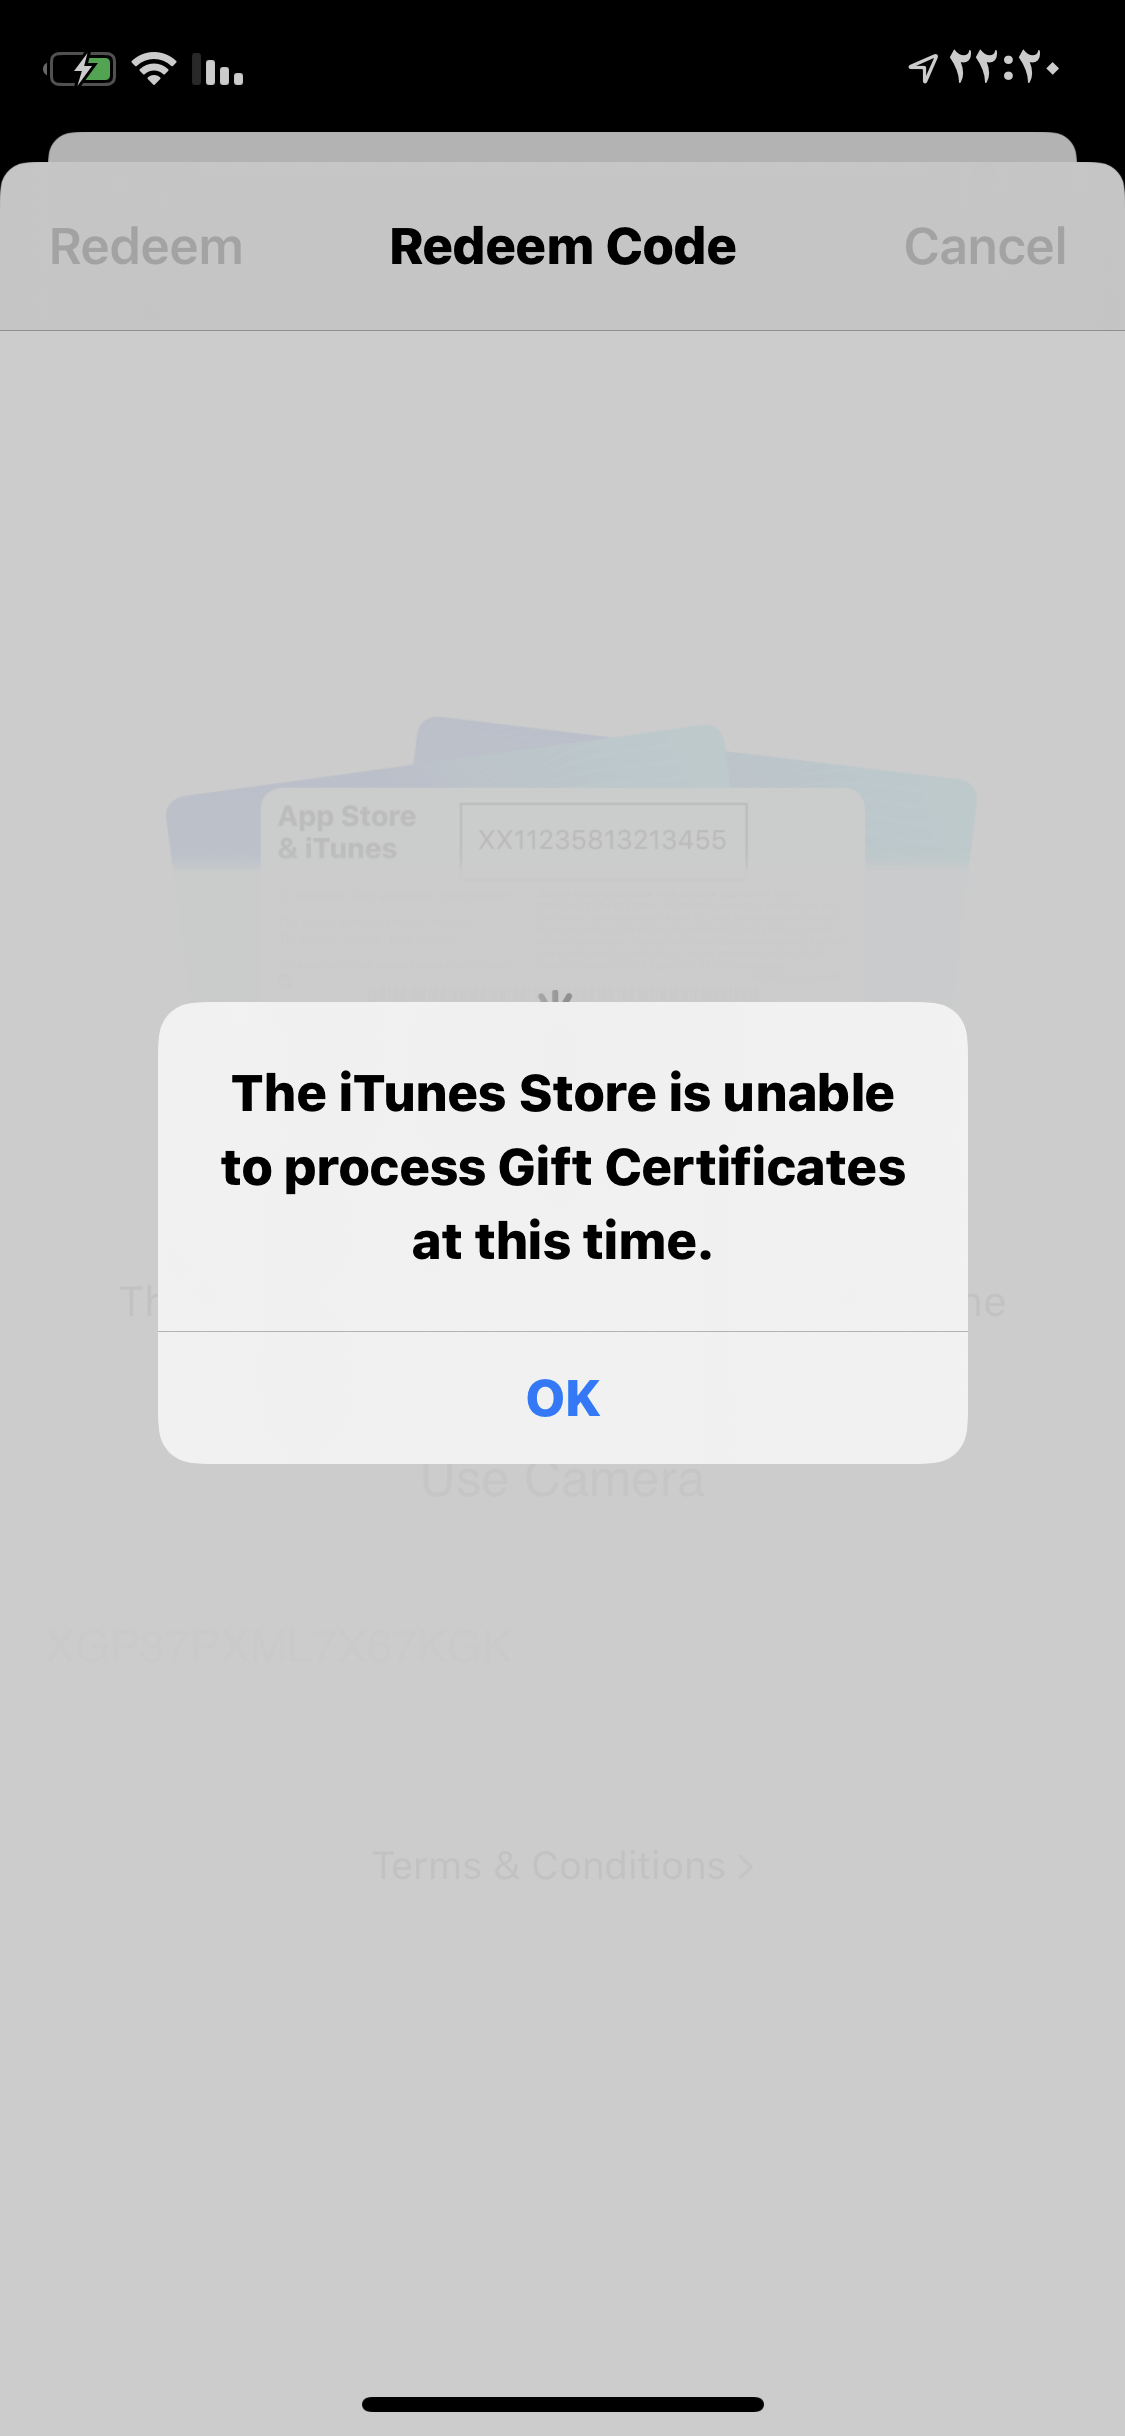 Can't Redeem gift card - Apple Community